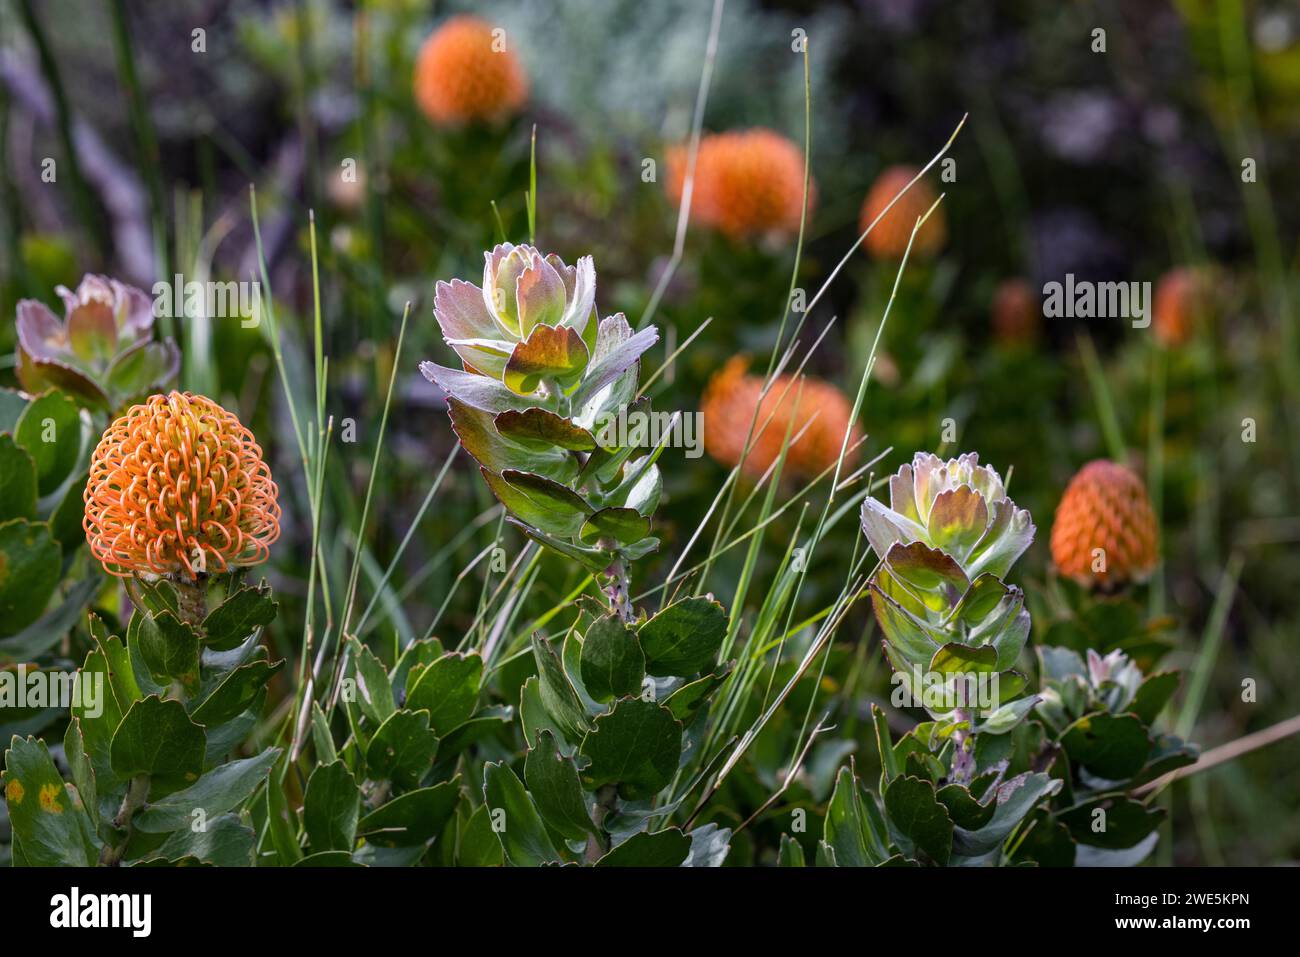 Pincushion Protea (Leucospermum patersonii), Grootbos Private Nature Reserve, Western Cape, South Africa Stock Photo